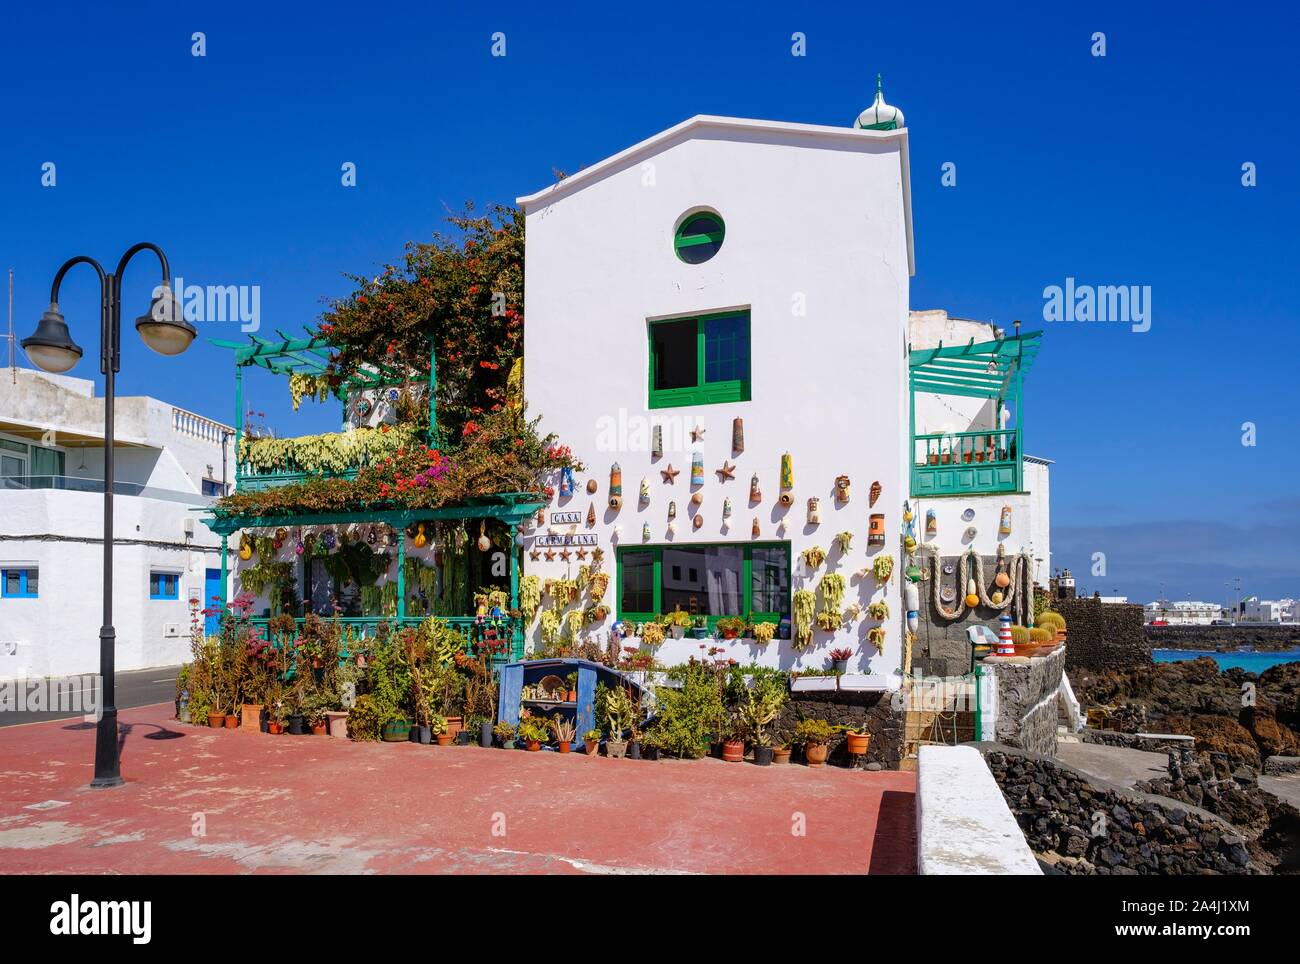 Decorated house with many potted plants and ceramics, village Punta Mujeres, Lanzarote, Canary Islands, Spain Stock Photo